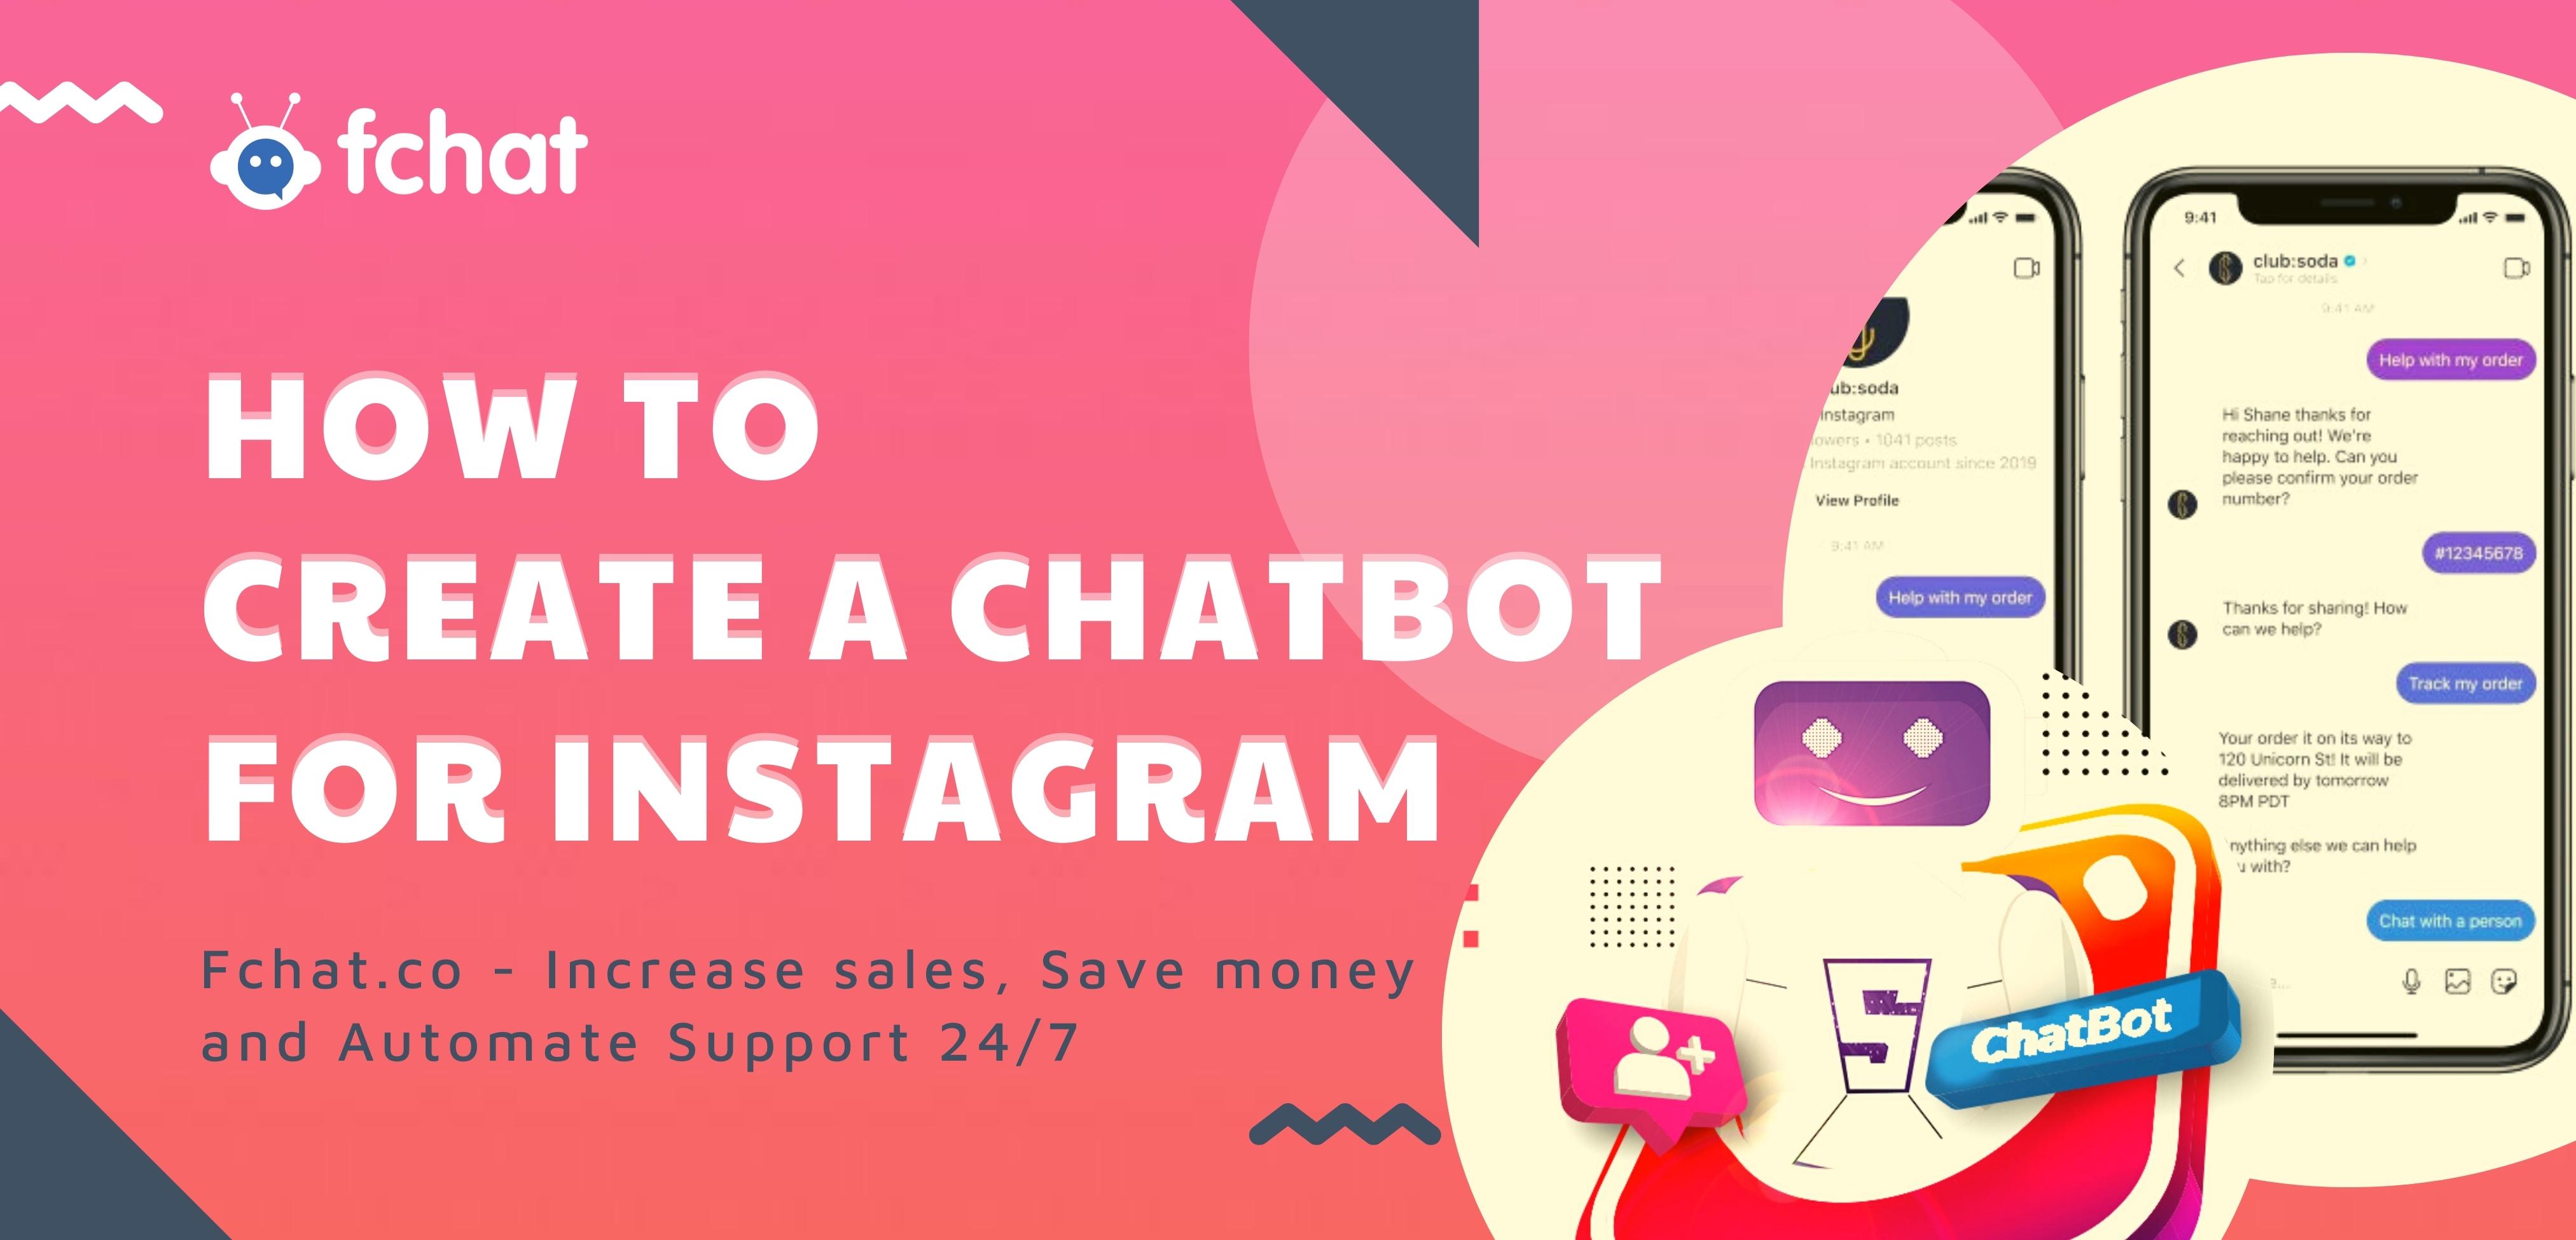 HOW TO CREATE A CHATBOT FOR INSTAGRAM